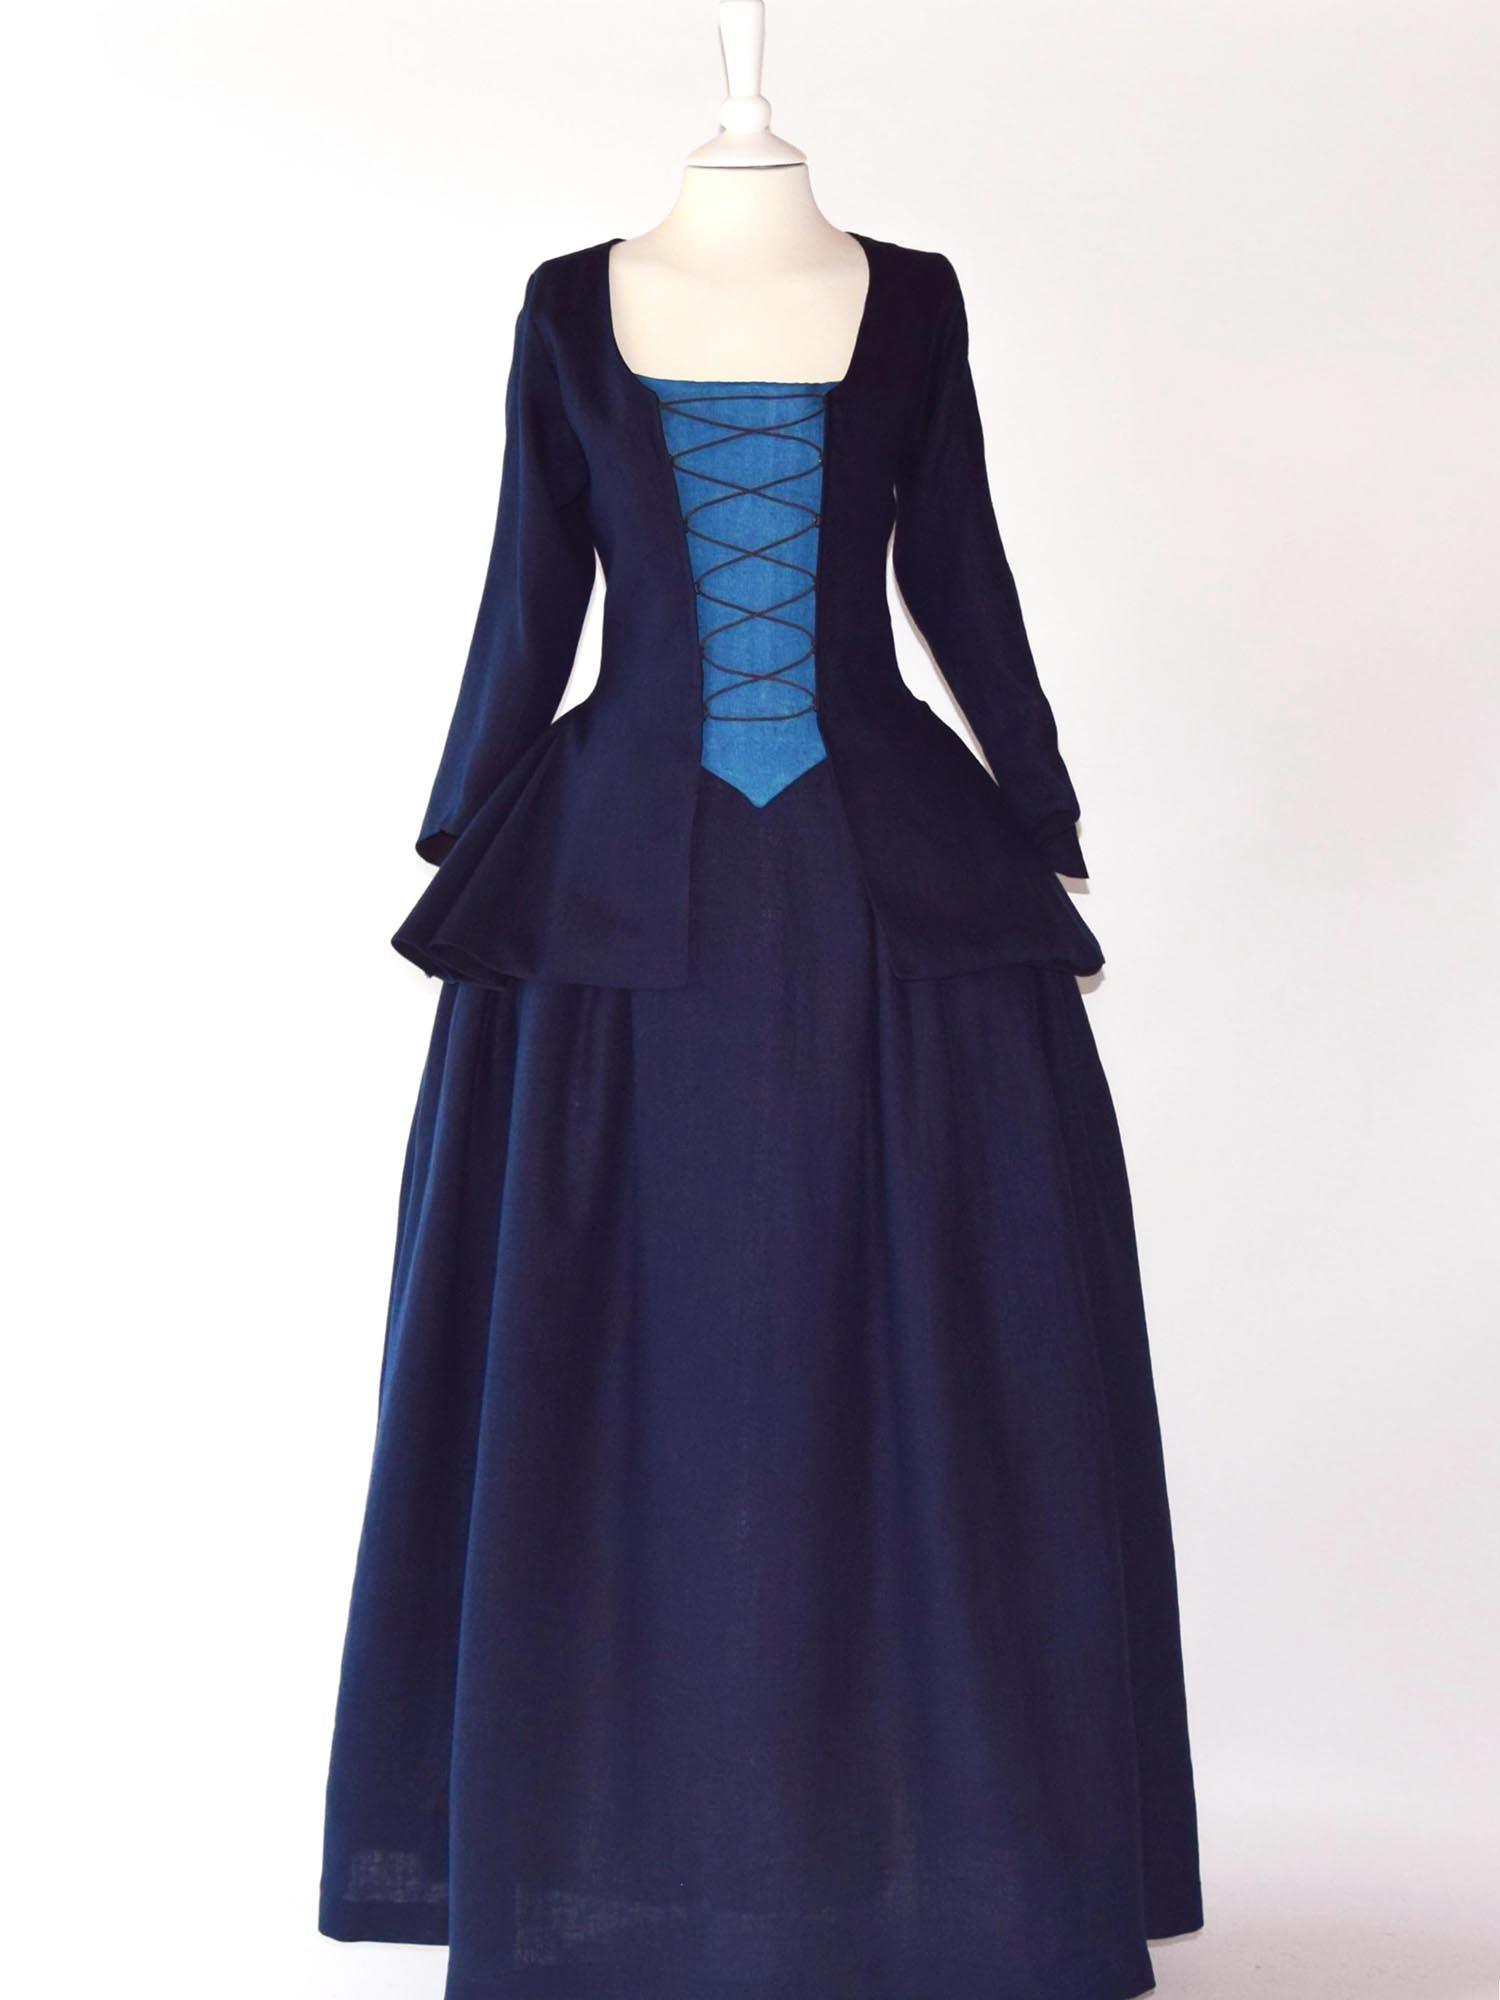 JANET, Colonial Costume in Night Blue Linen - Atelier Serraspina